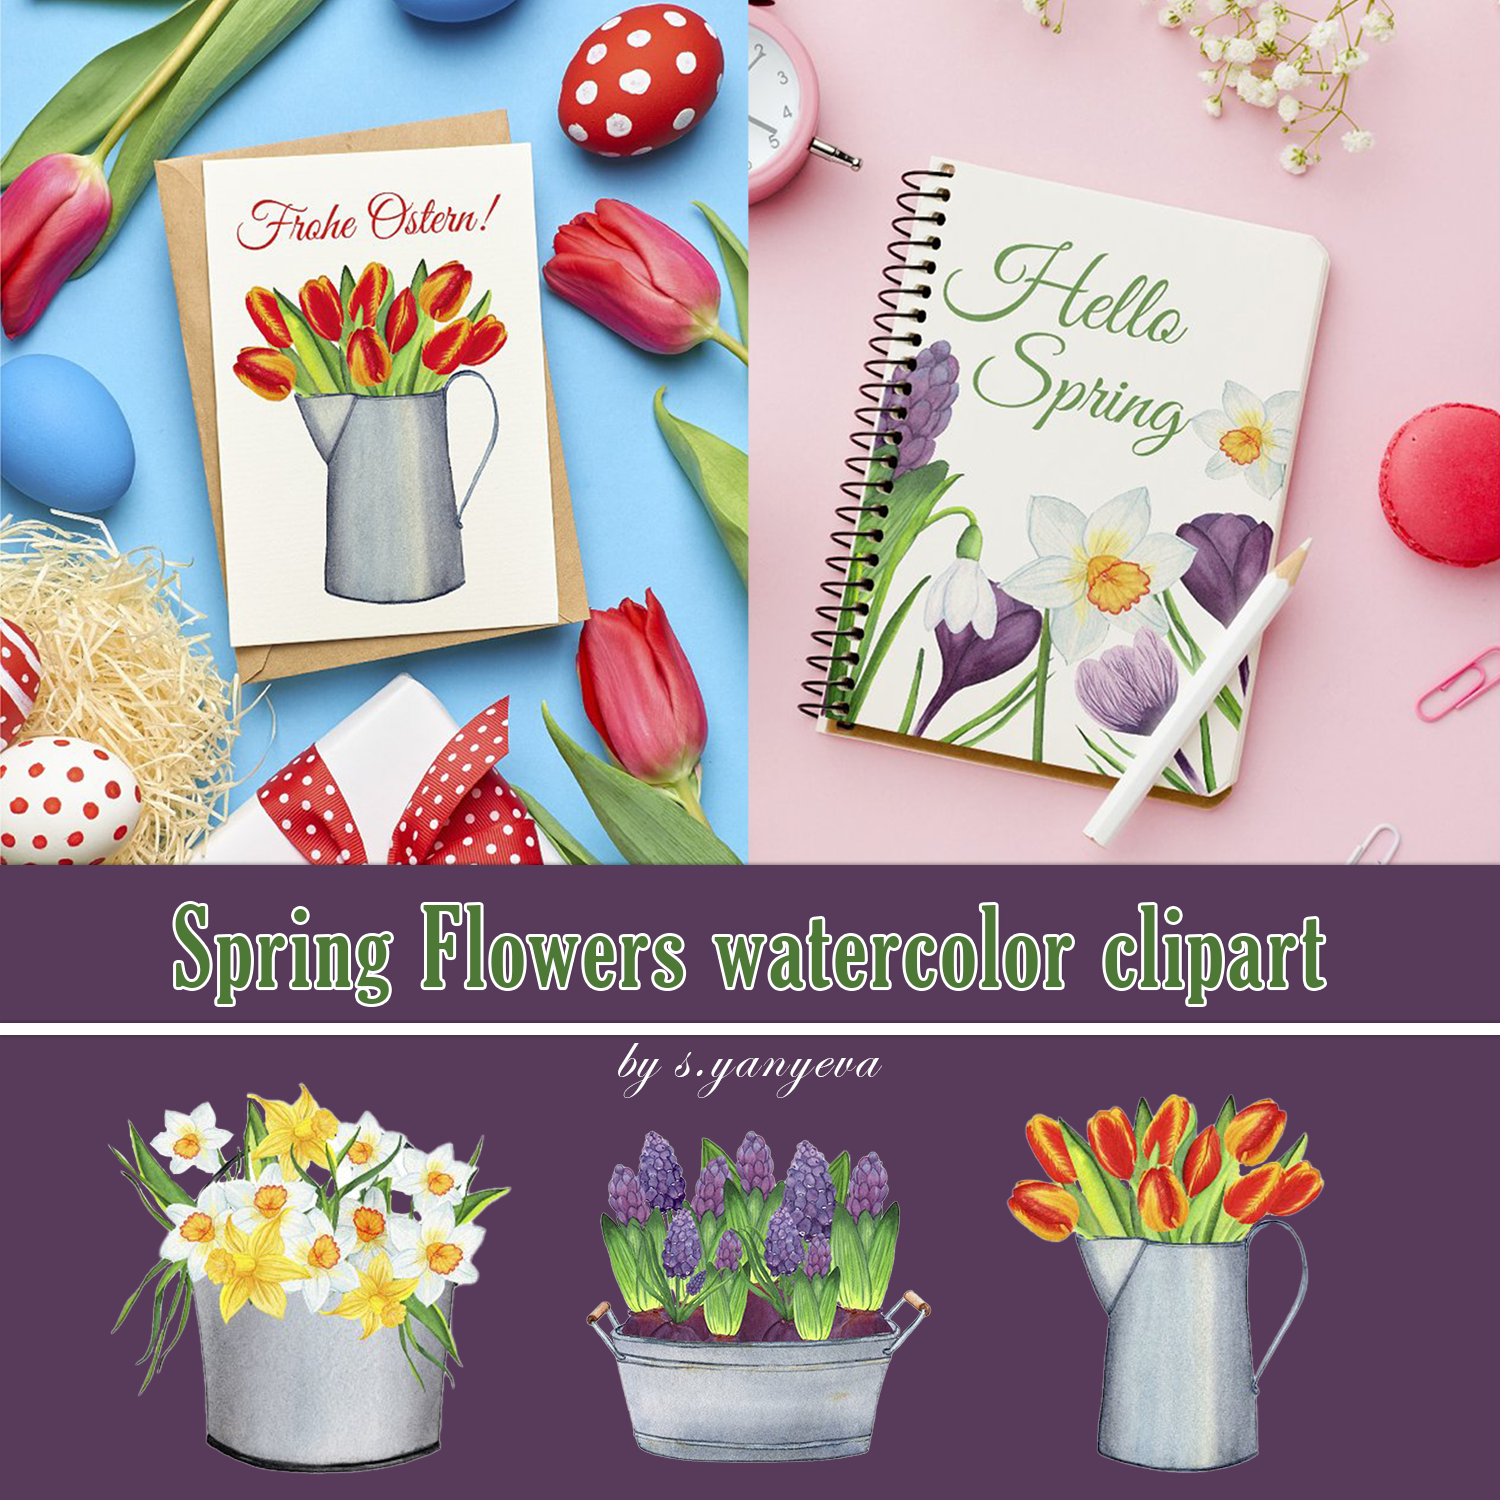 Spring flowers watercolor clipart preview.